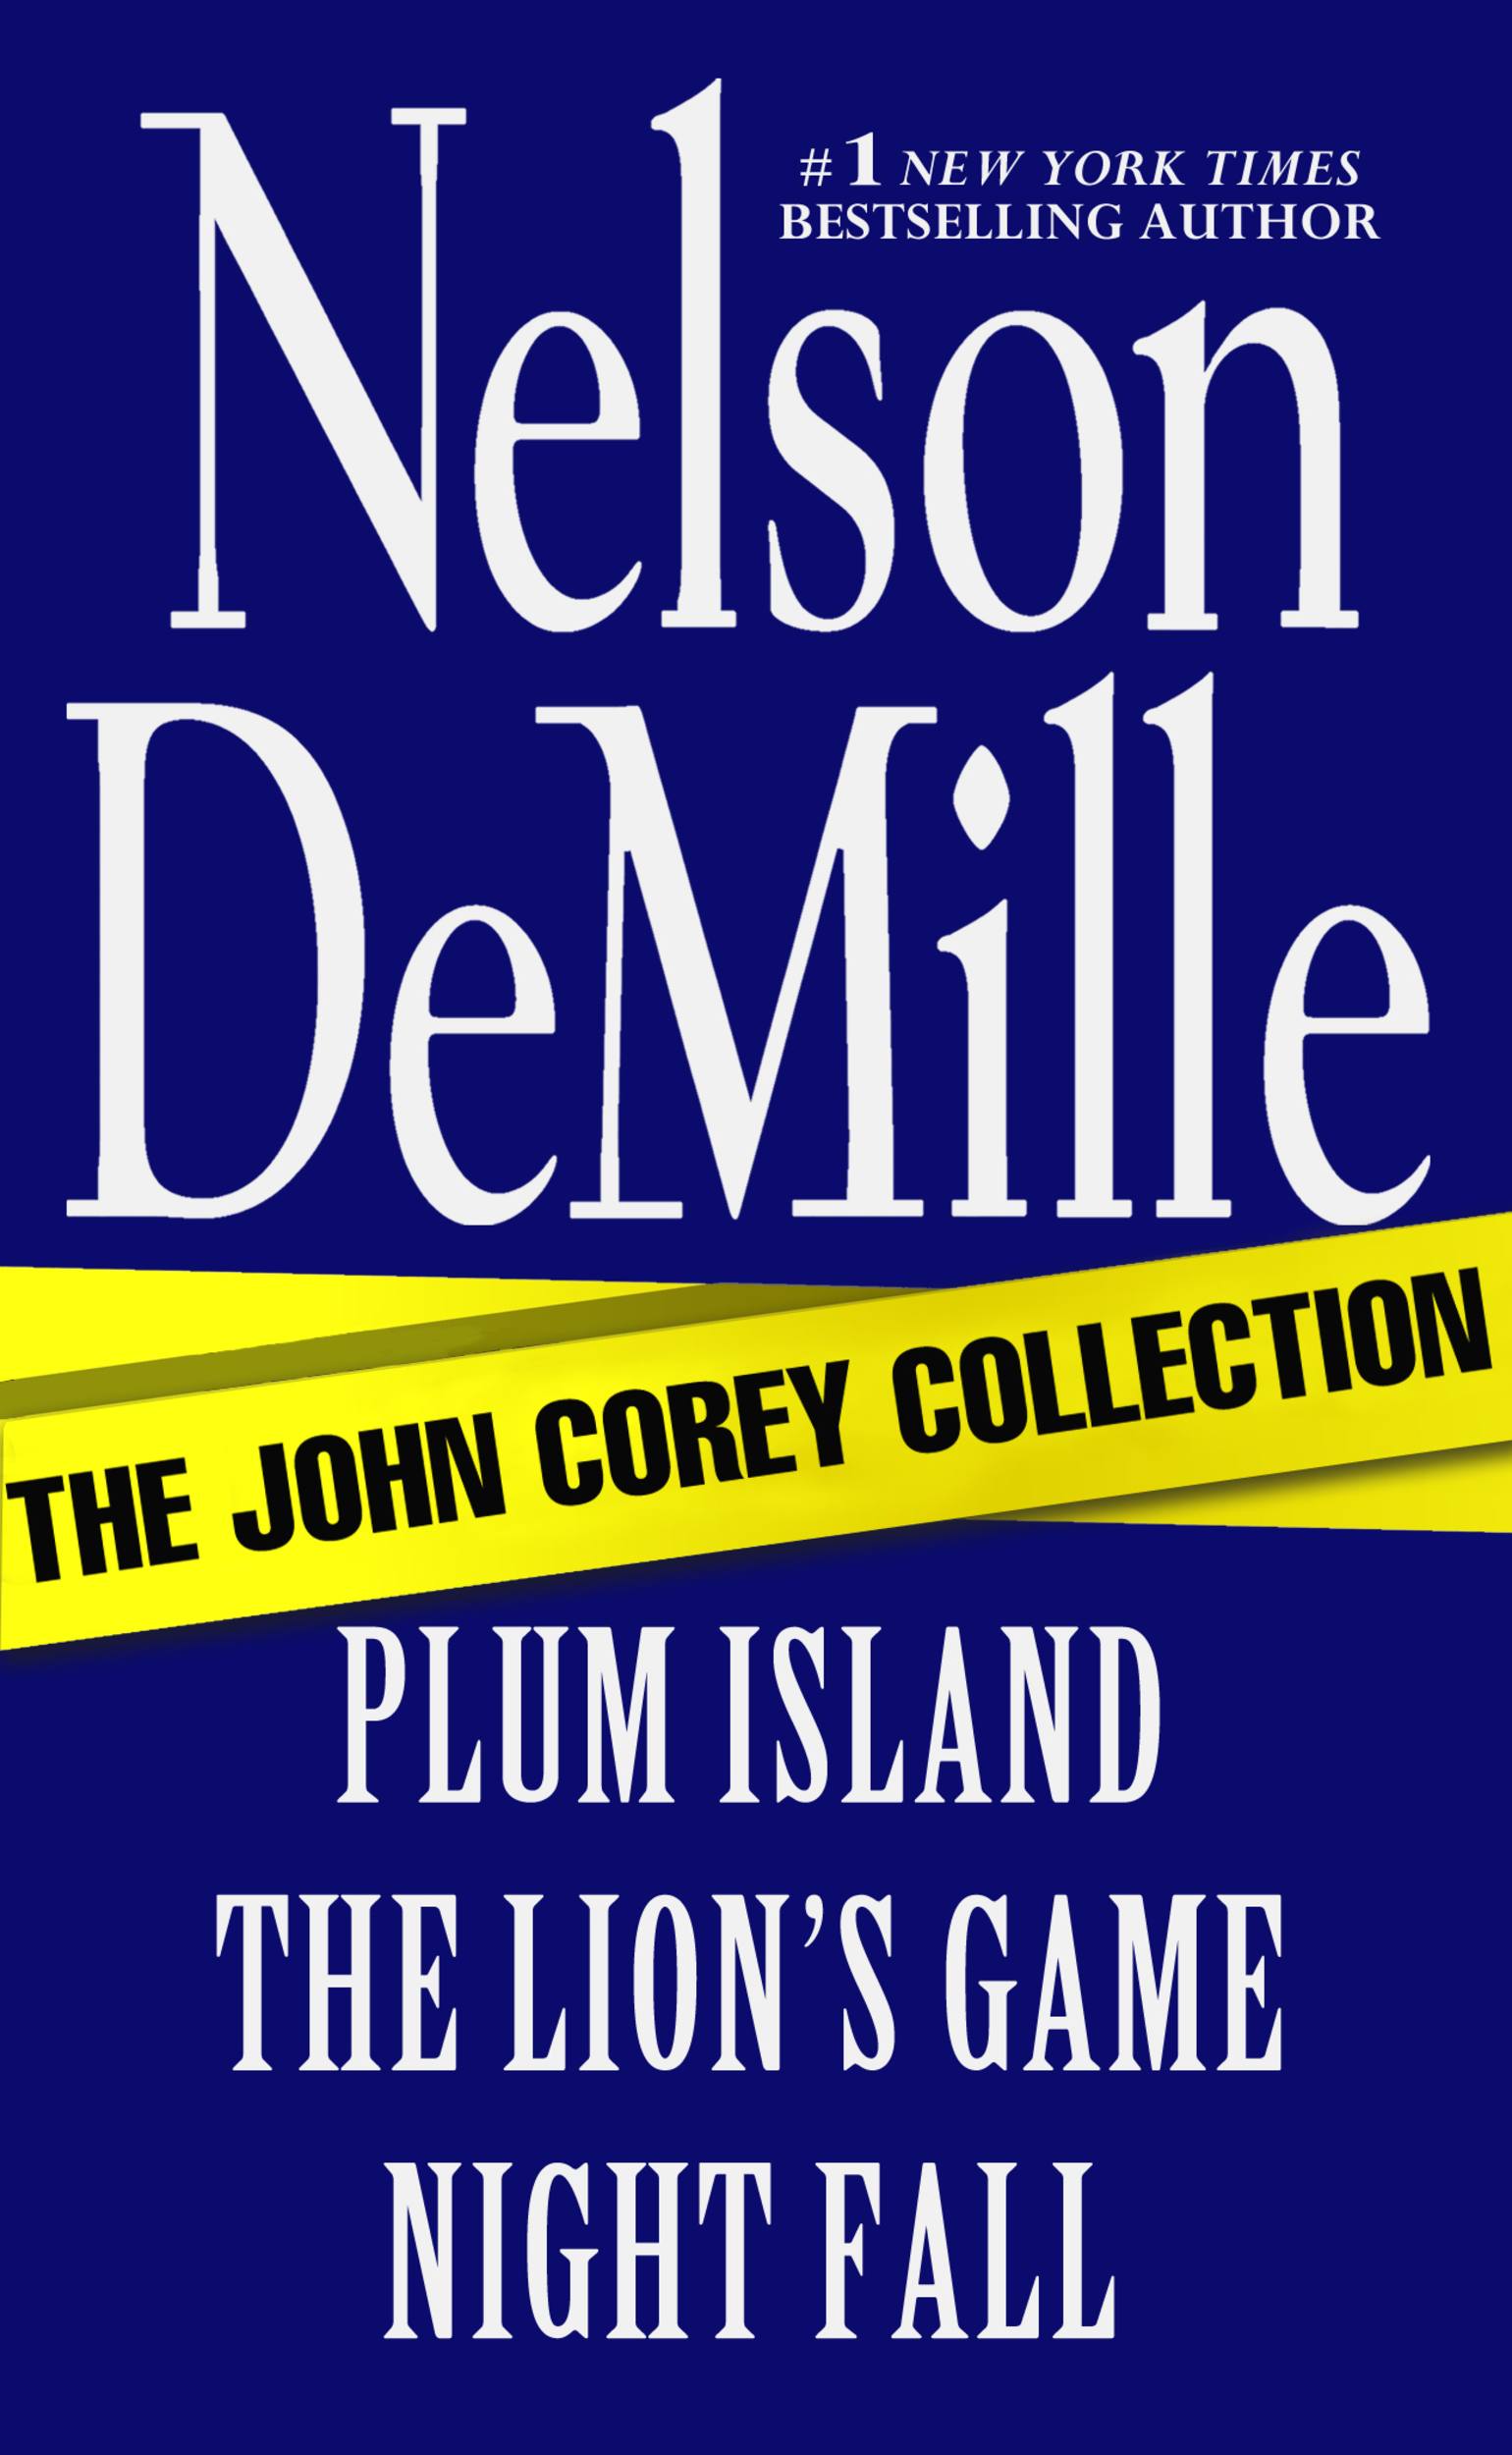 Image de couverture de The John Corey Collection [electronic resource] : Plum Island, The Lion's Game, and Night Fall Omnibus